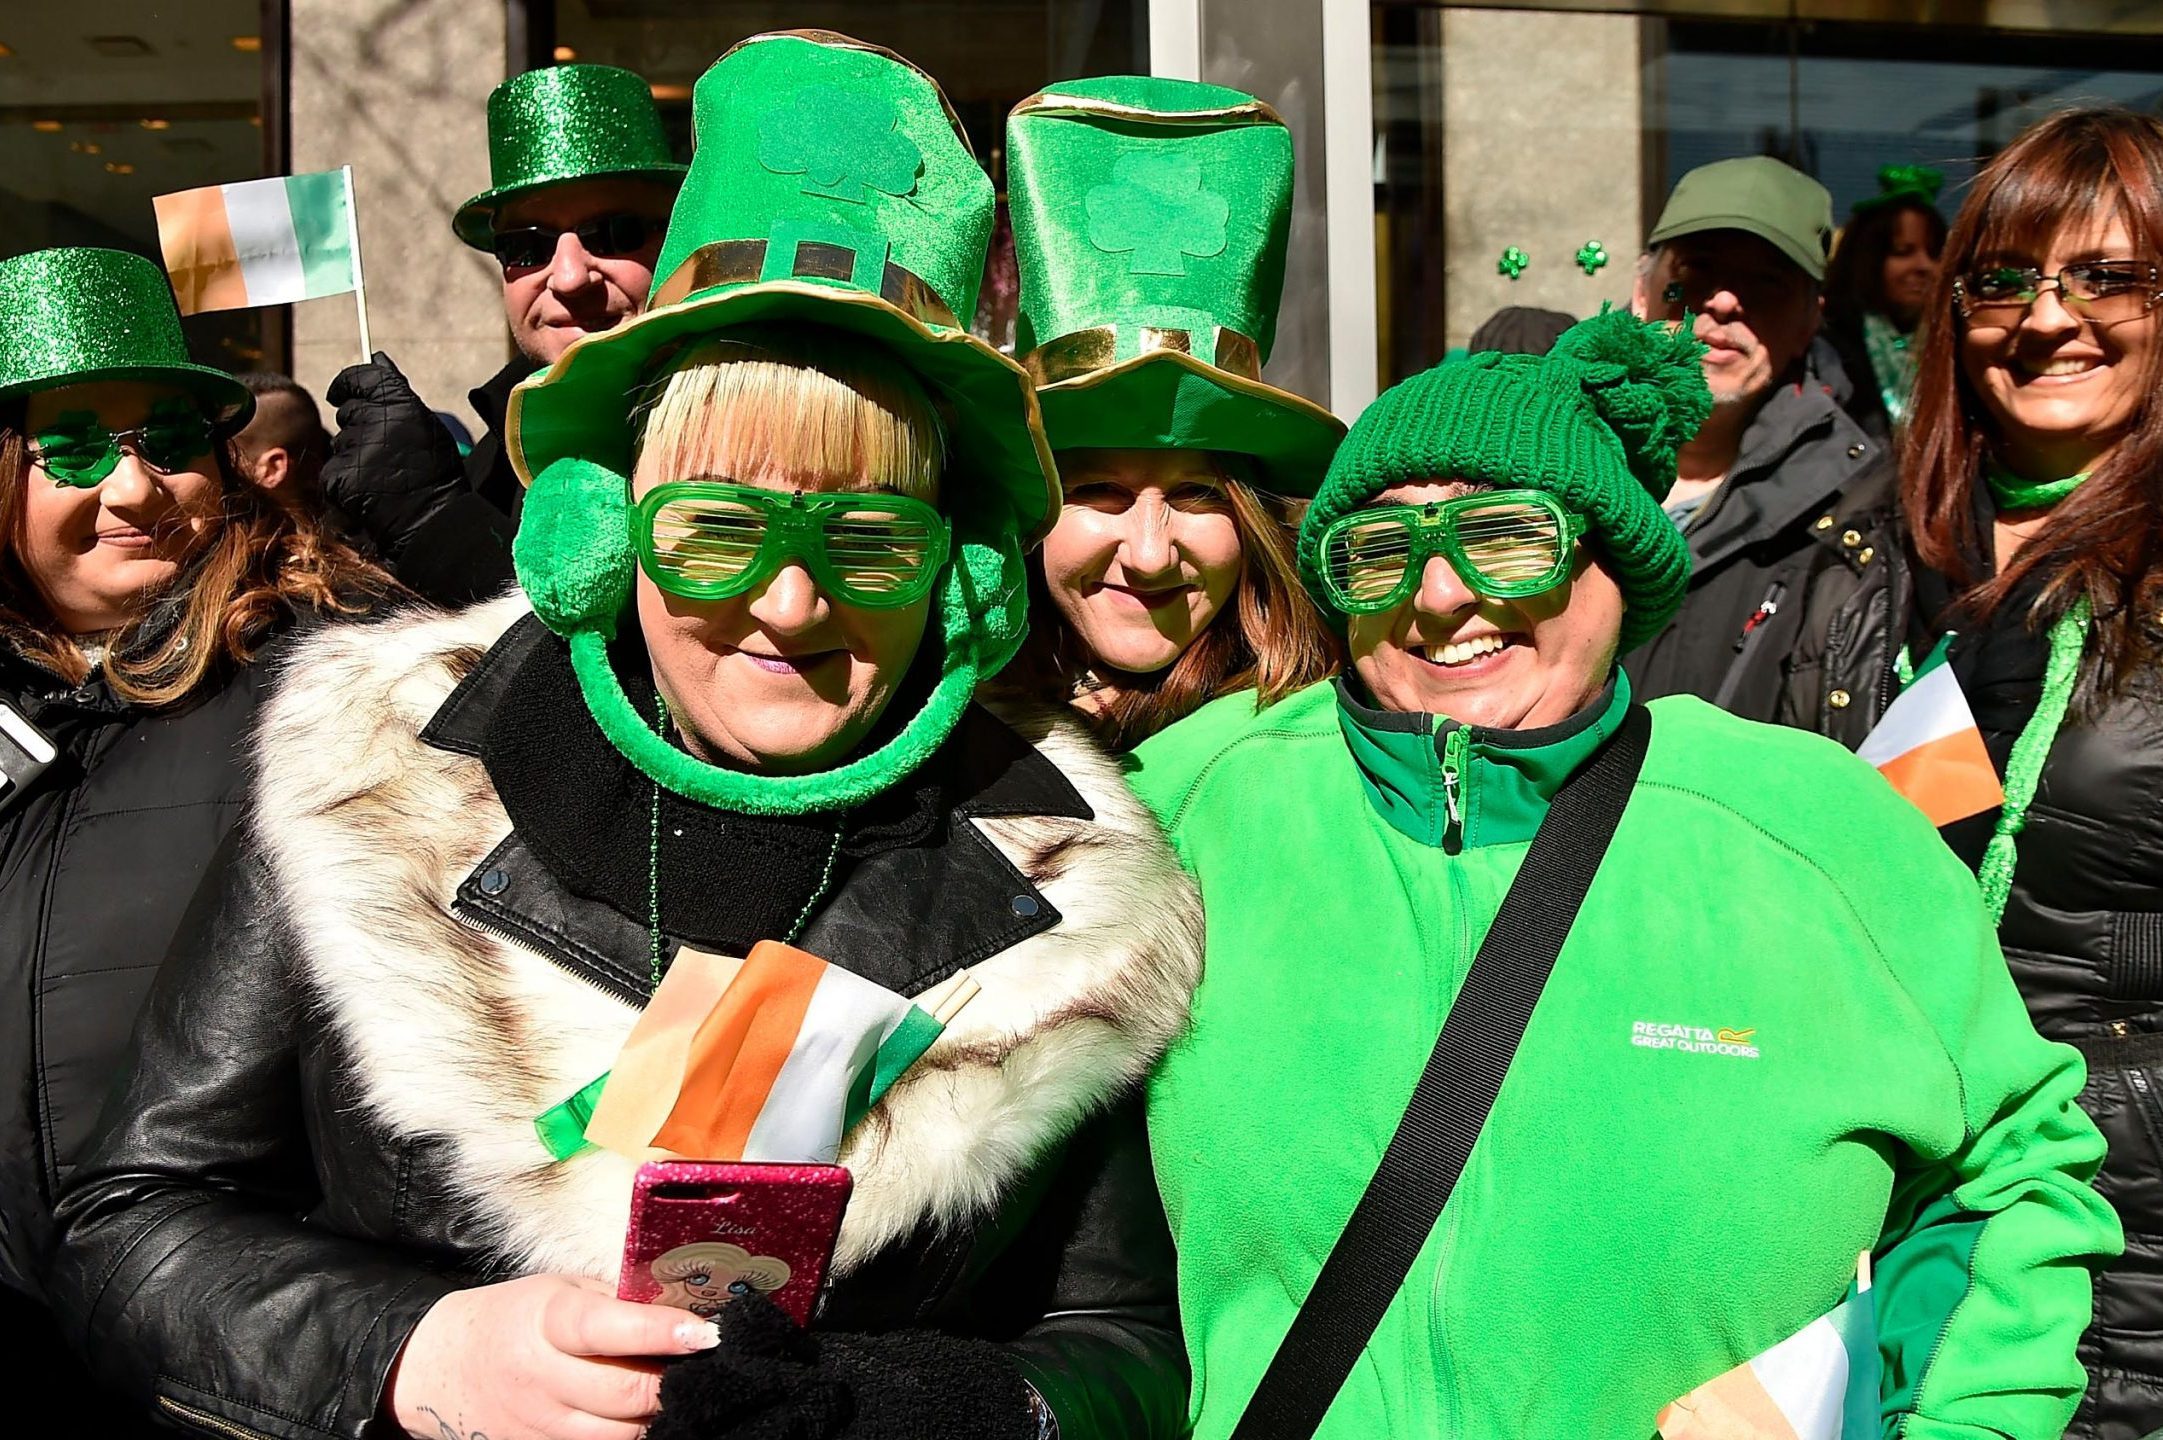 St Patrick's Day - news, events, history and more